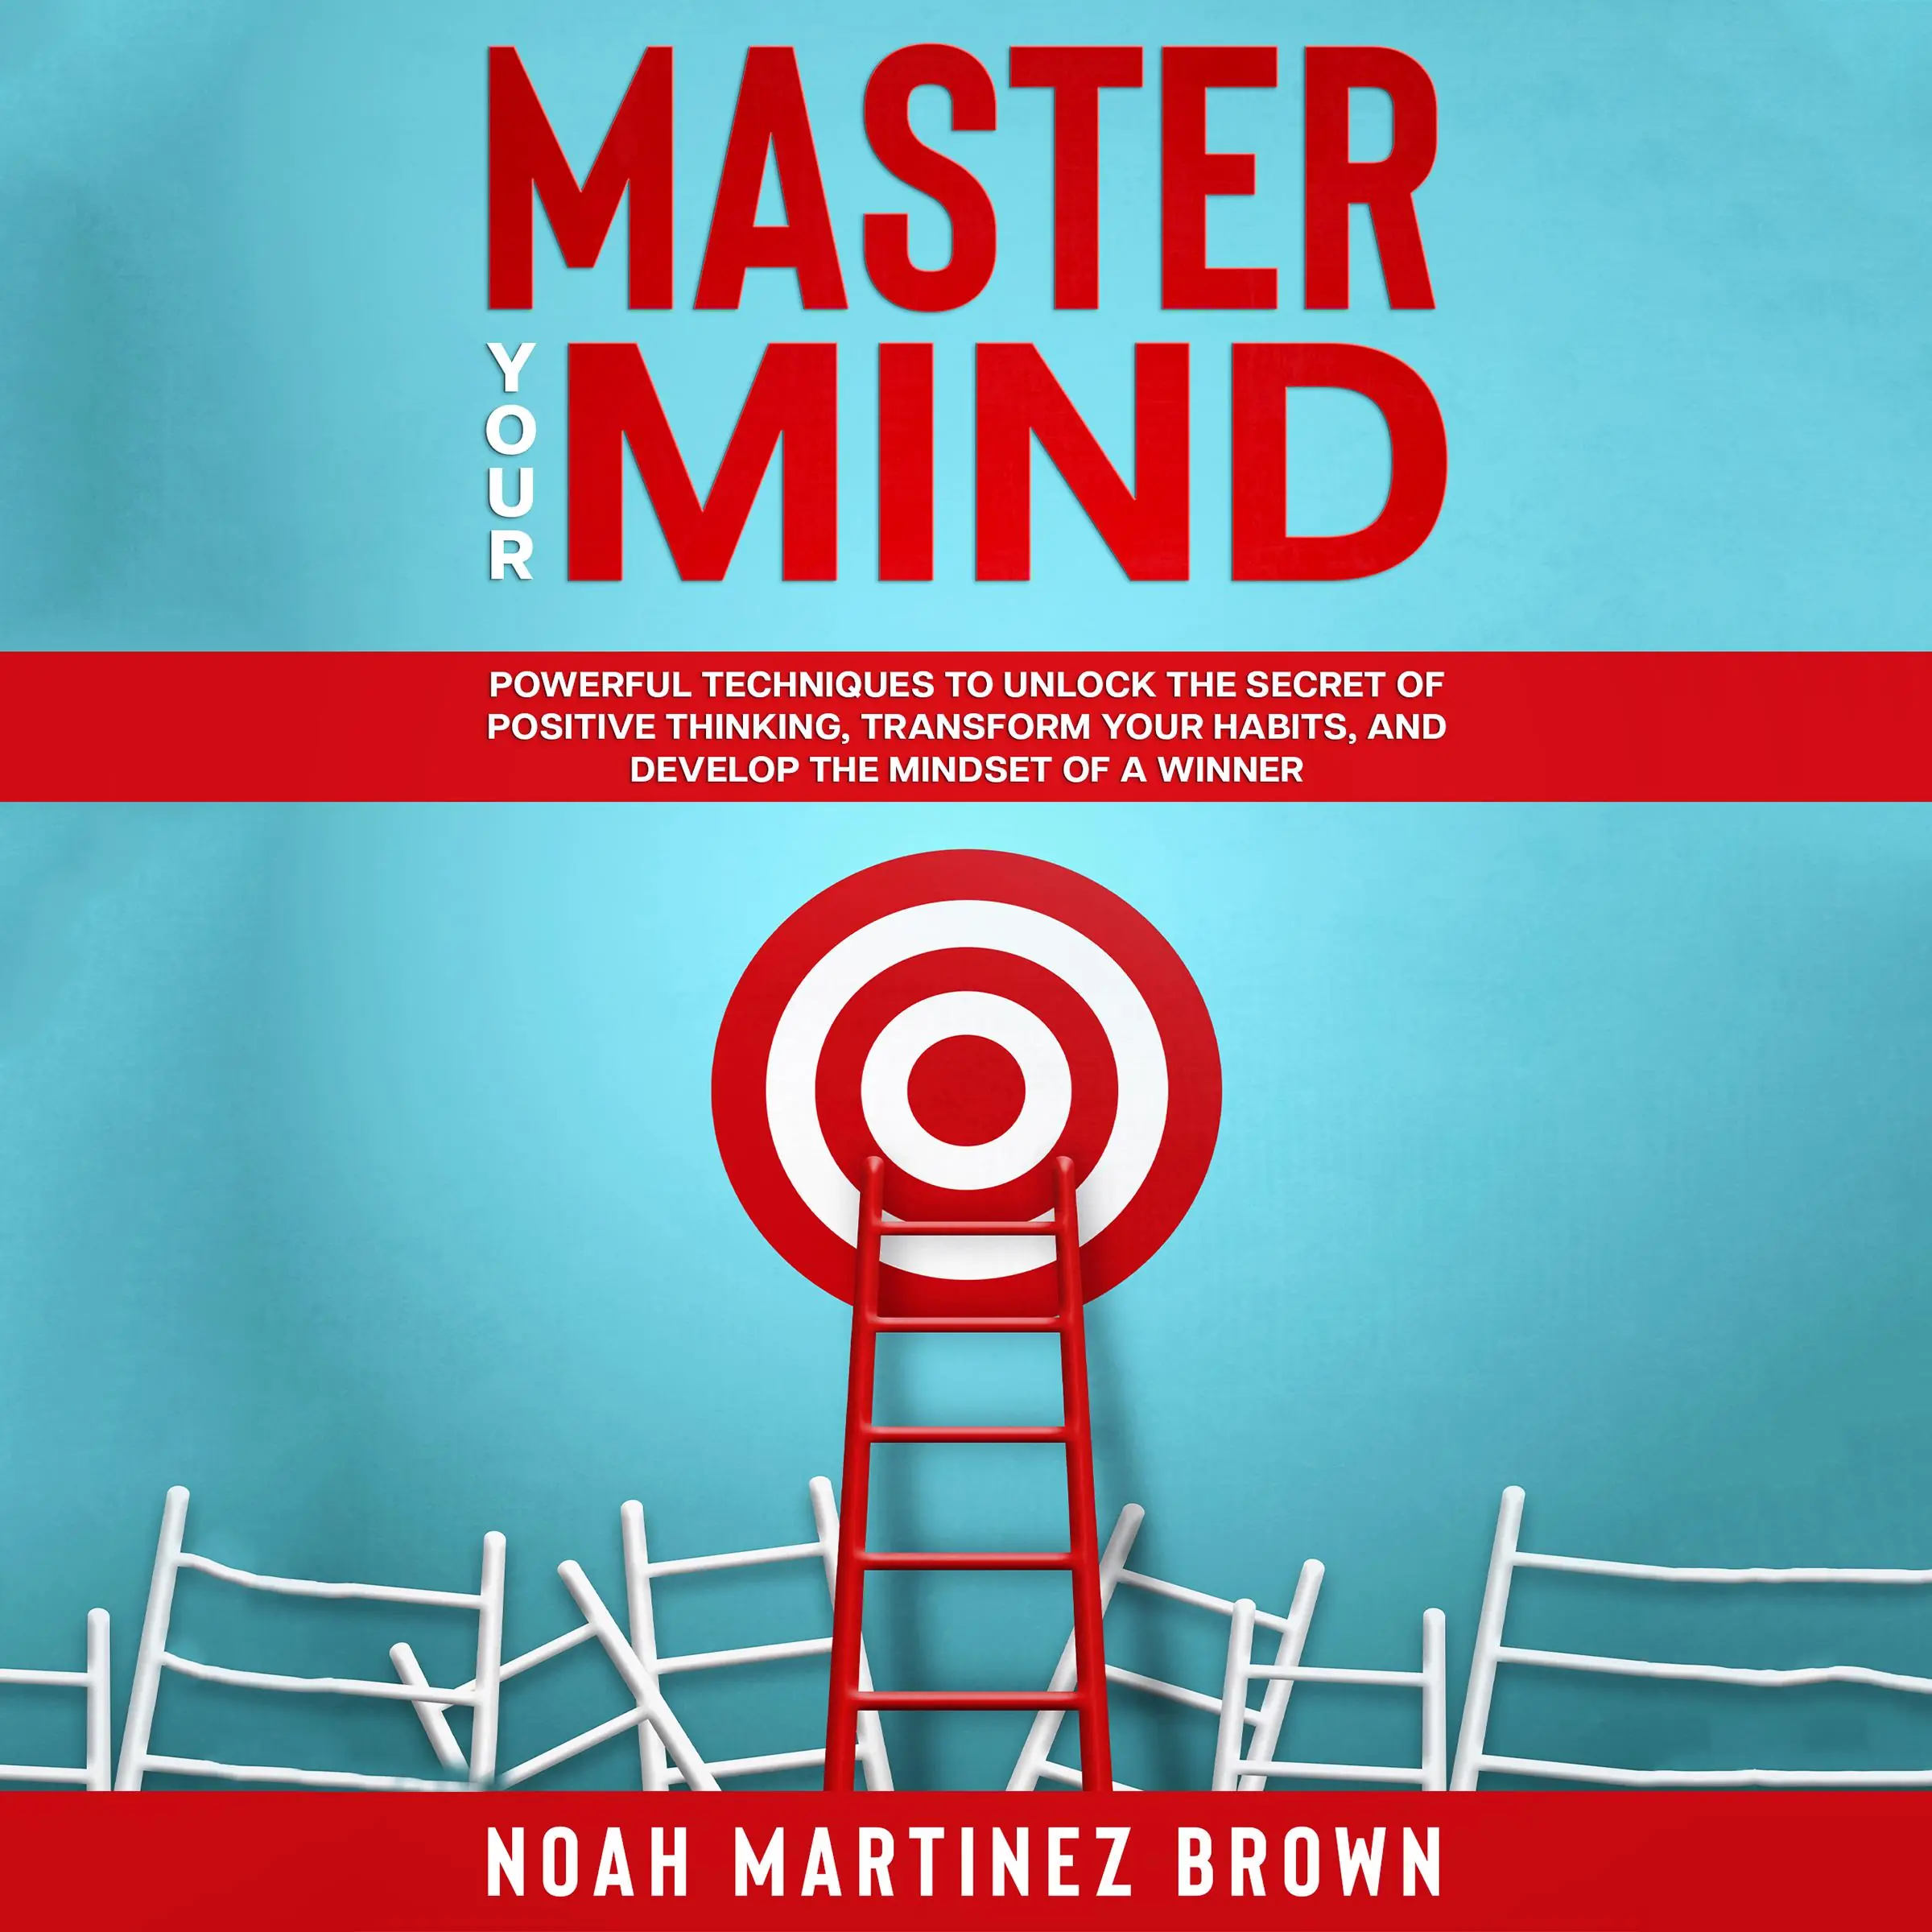 Master Your Mind Audiobook by Noah Martinez Brown